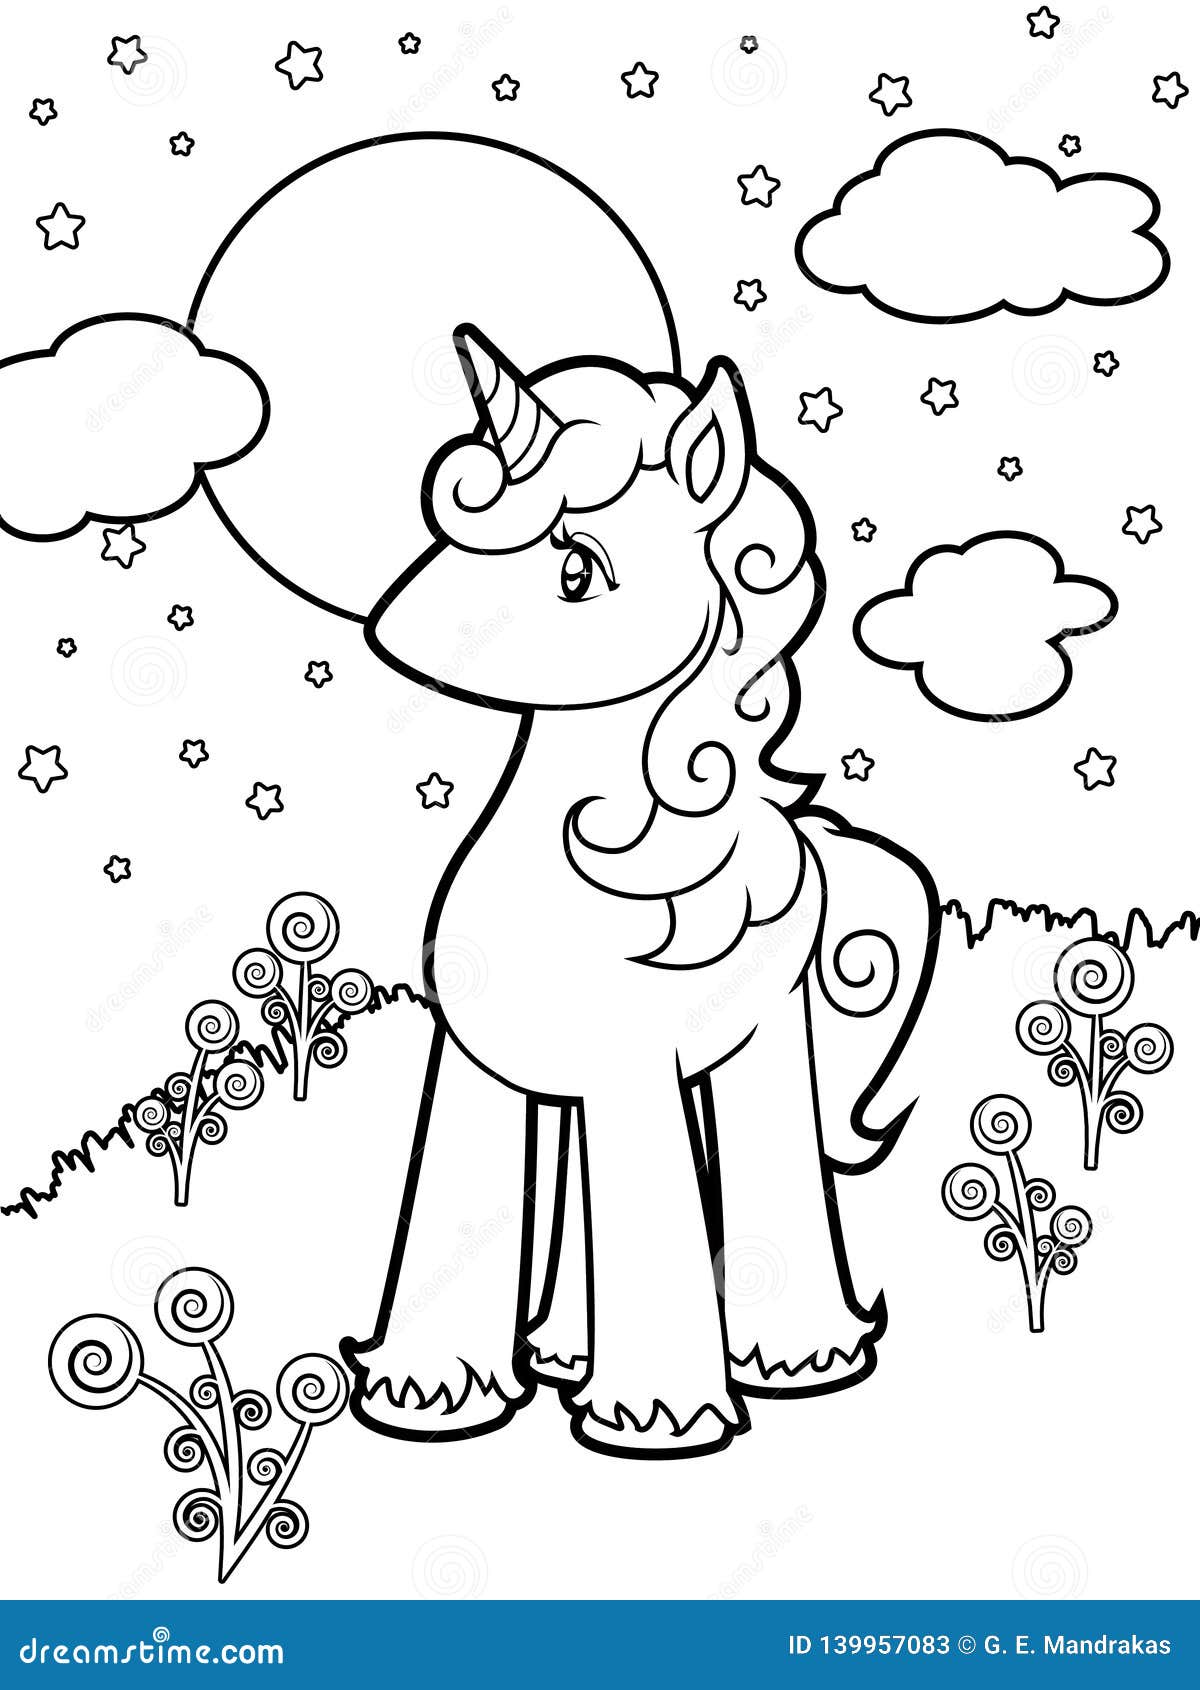 coloring sheet of cute unicorn in the moonlight and stars